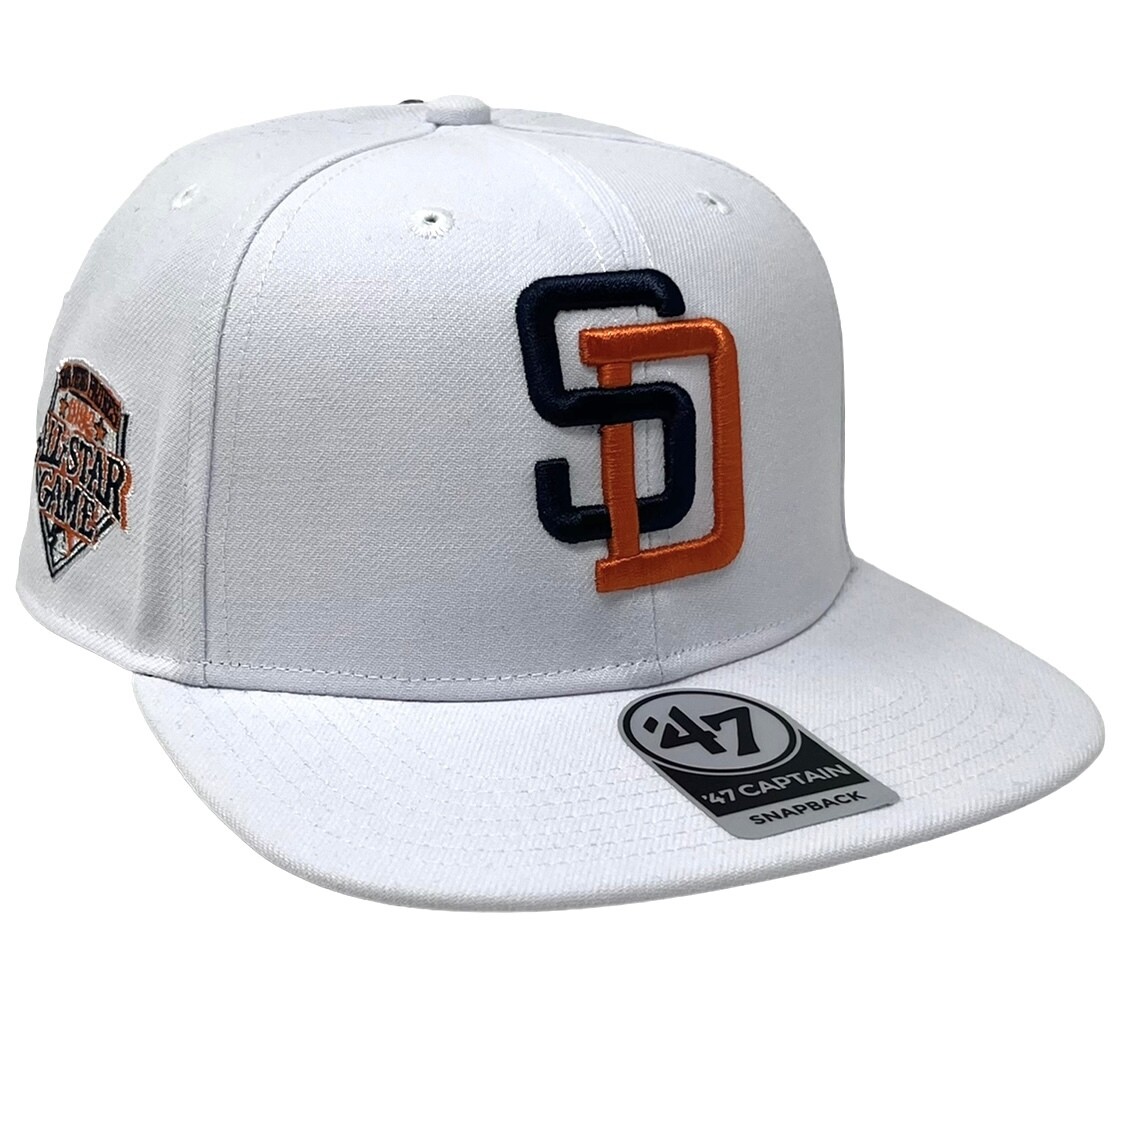 San Diego Padres 1992 All Star Game Snapback Hat